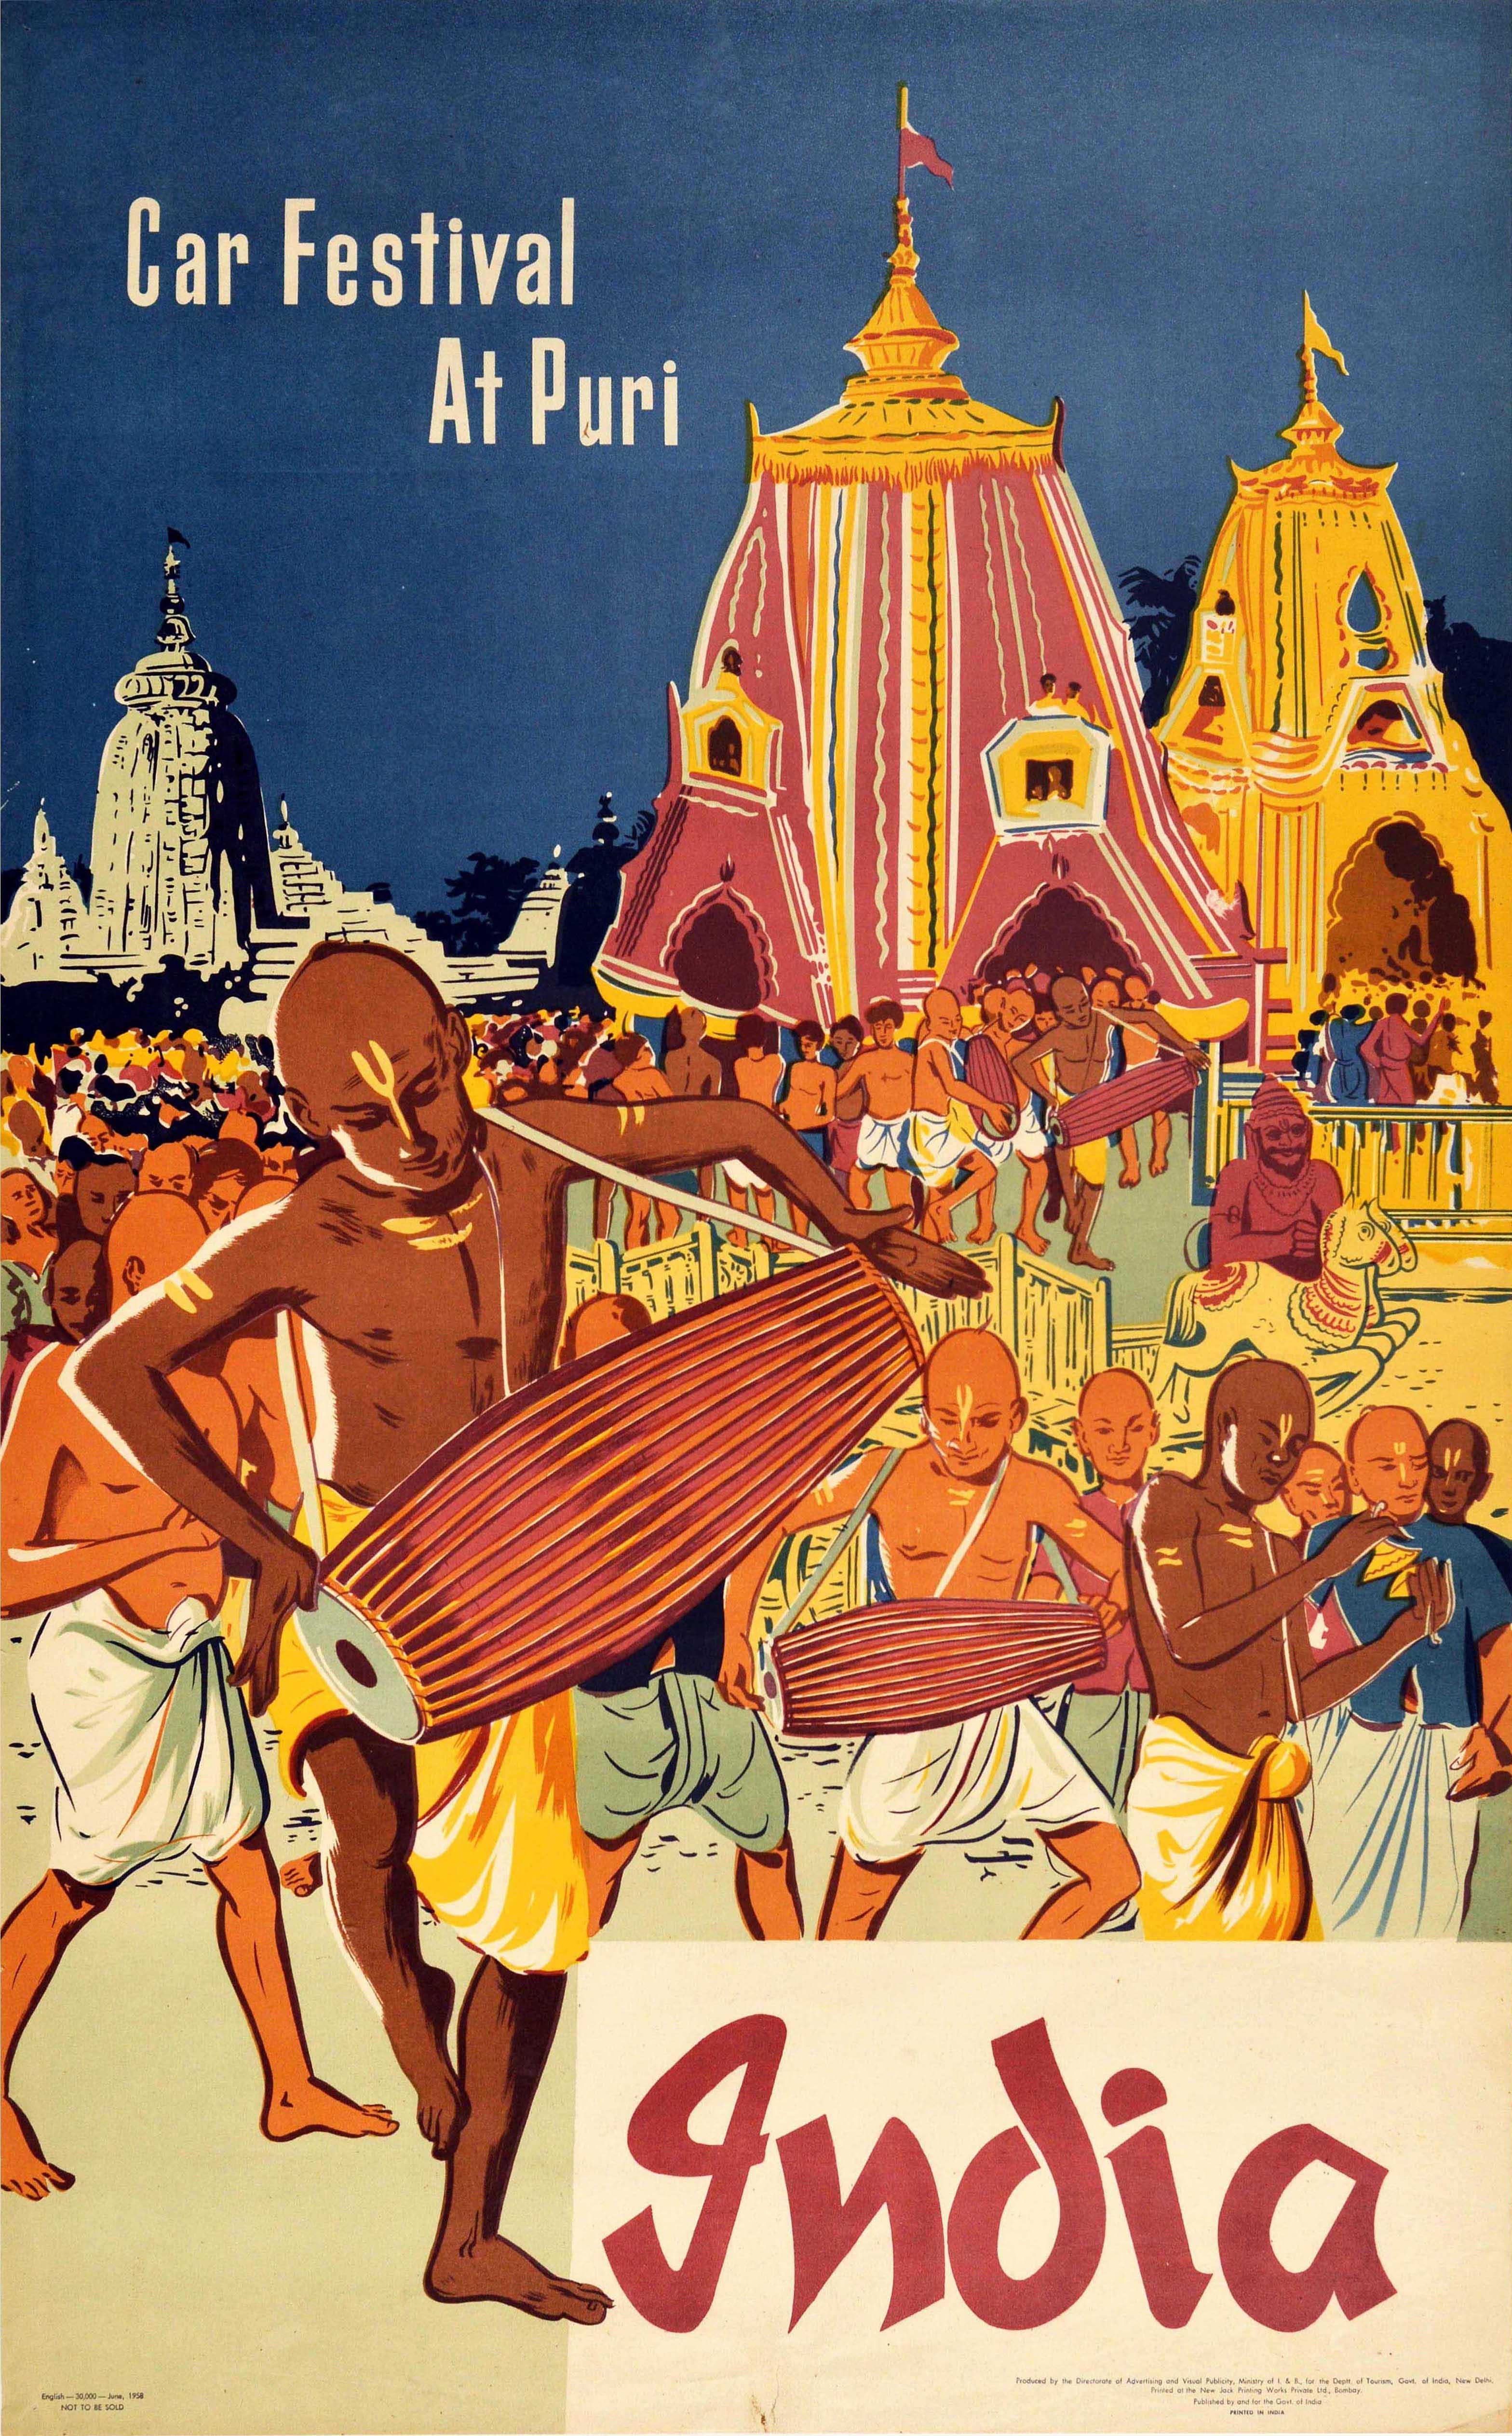 Original vintage travel poster advertising the Car Festival at Puri India featuring a colourful design showing crowds of people playing music on drums and walking in procession with decorated chariots of the deities in the background with the